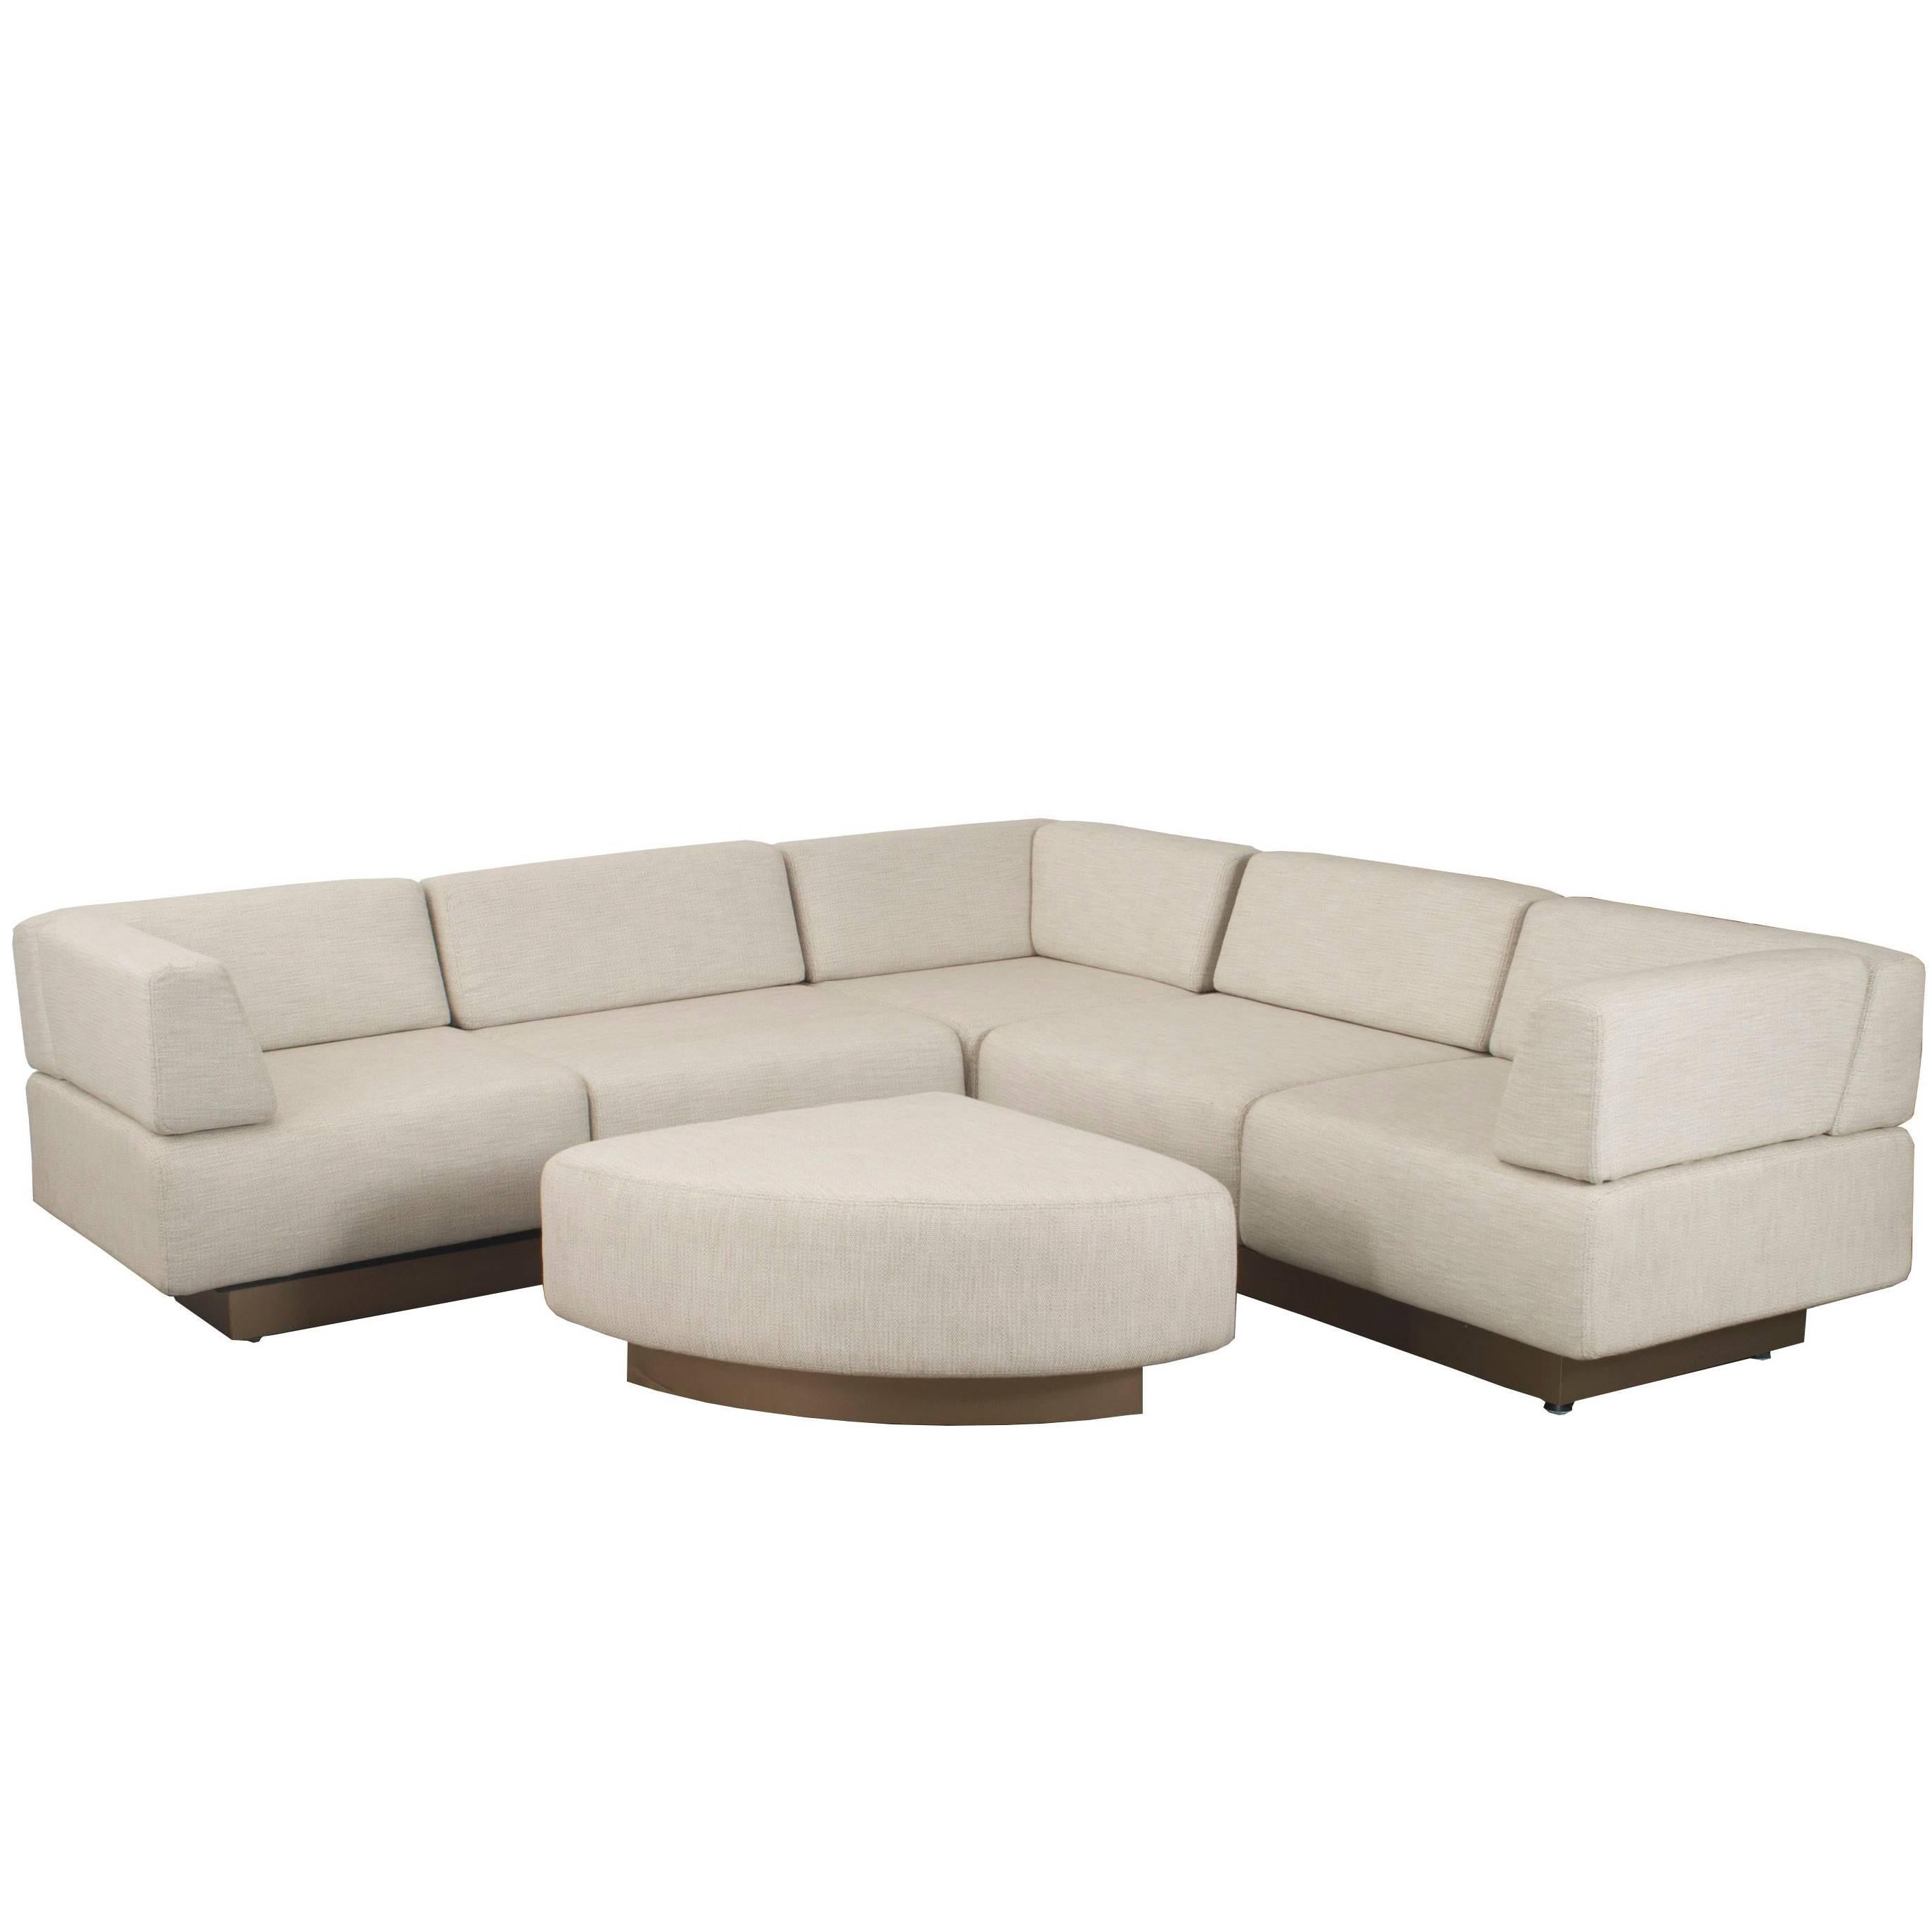 American Midcentury Four-Piece Sectional Sofa